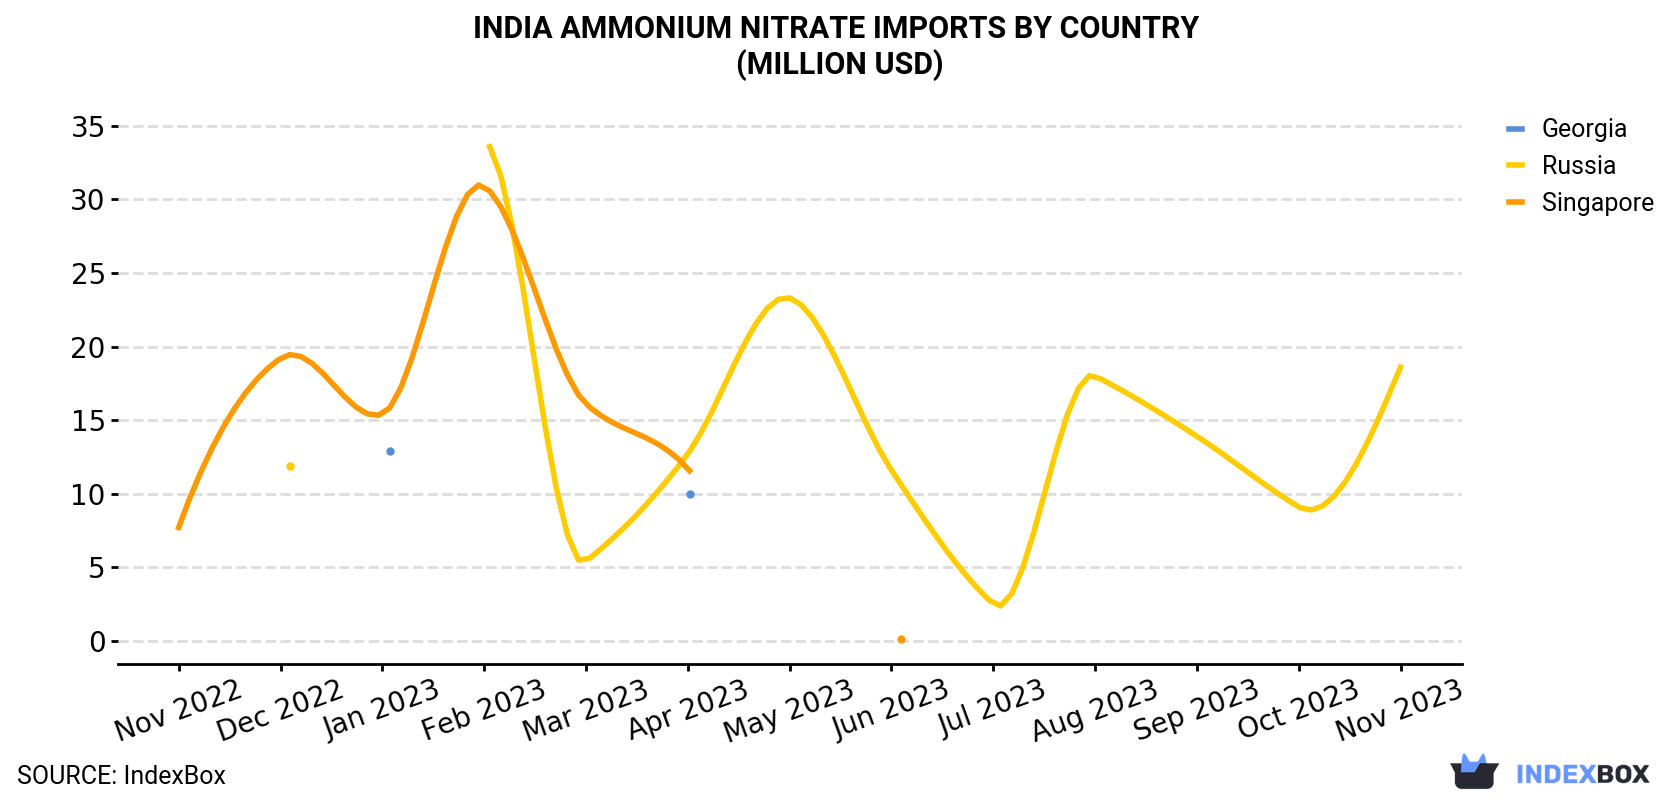 India Ammonium Nitrate Imports By Country (Million USD)